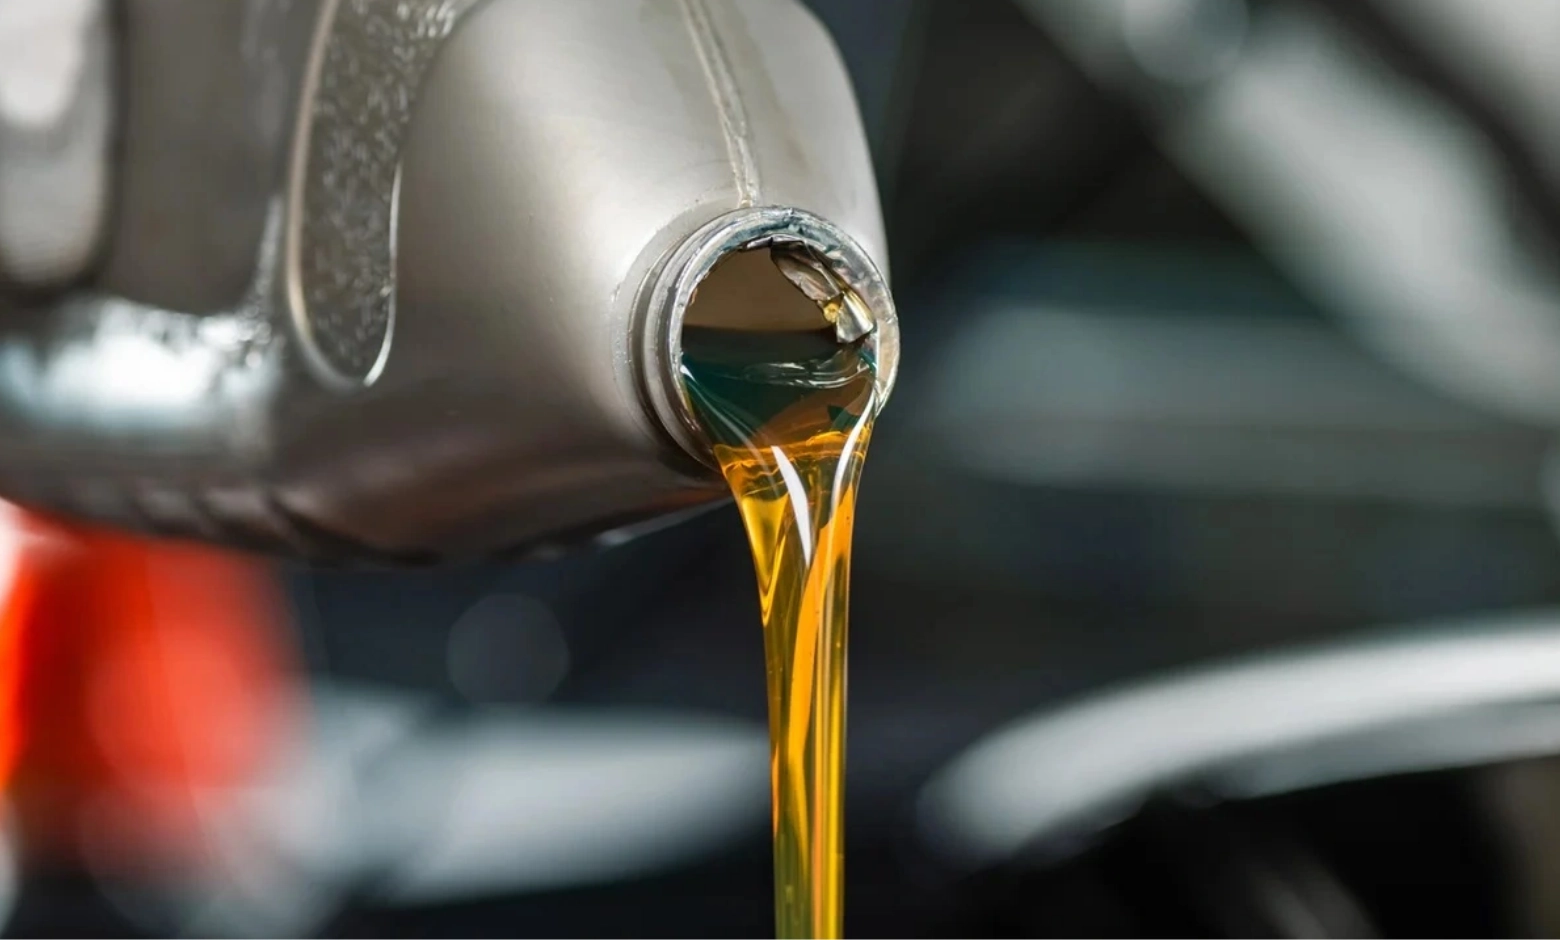 Jiffy Lube Synthetic Oil Change Price